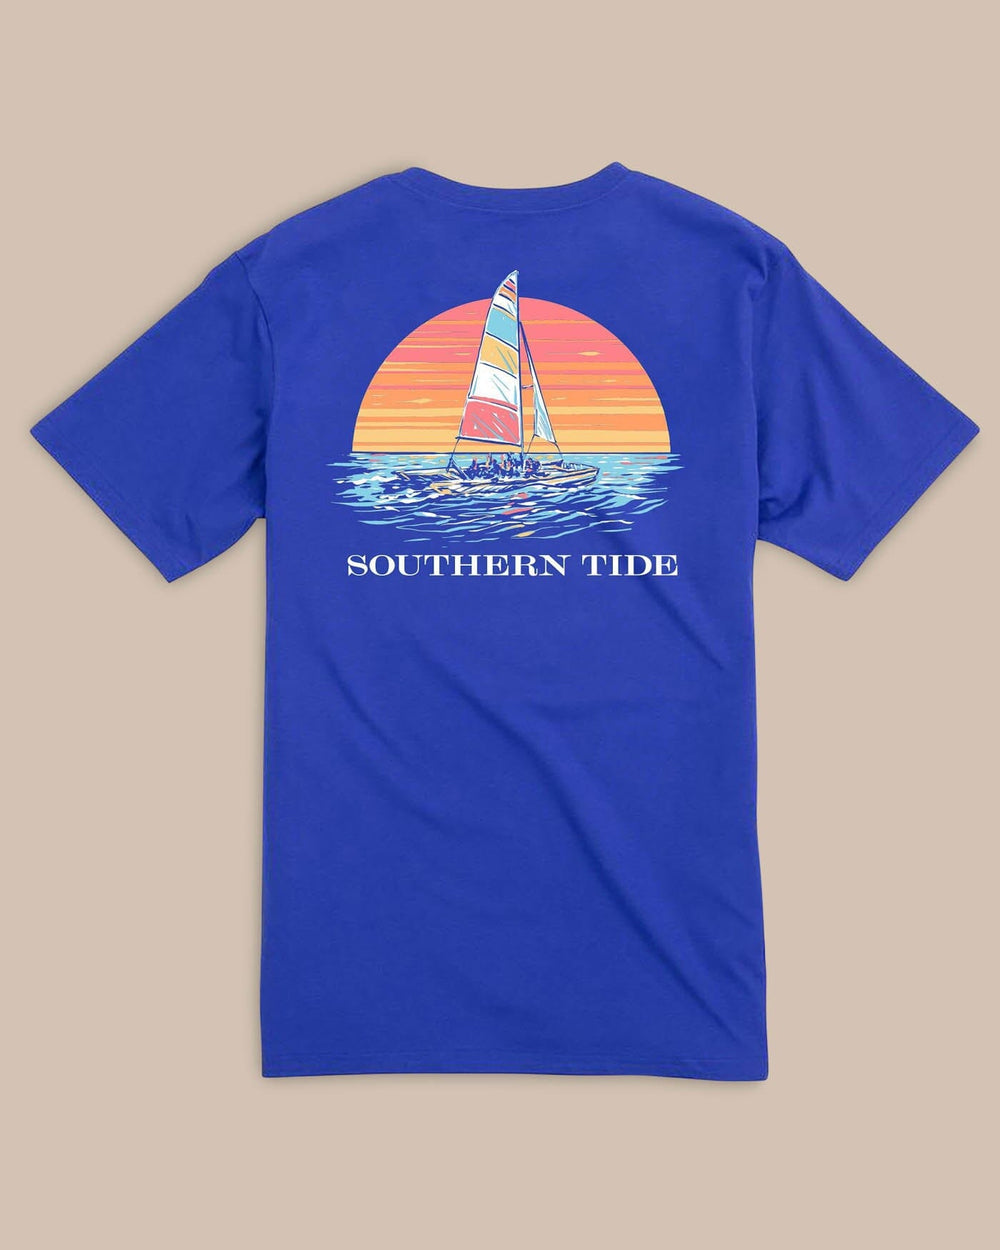 The back view of the Sunset Silhouette T-Shirt by Southern Tide - University Blue